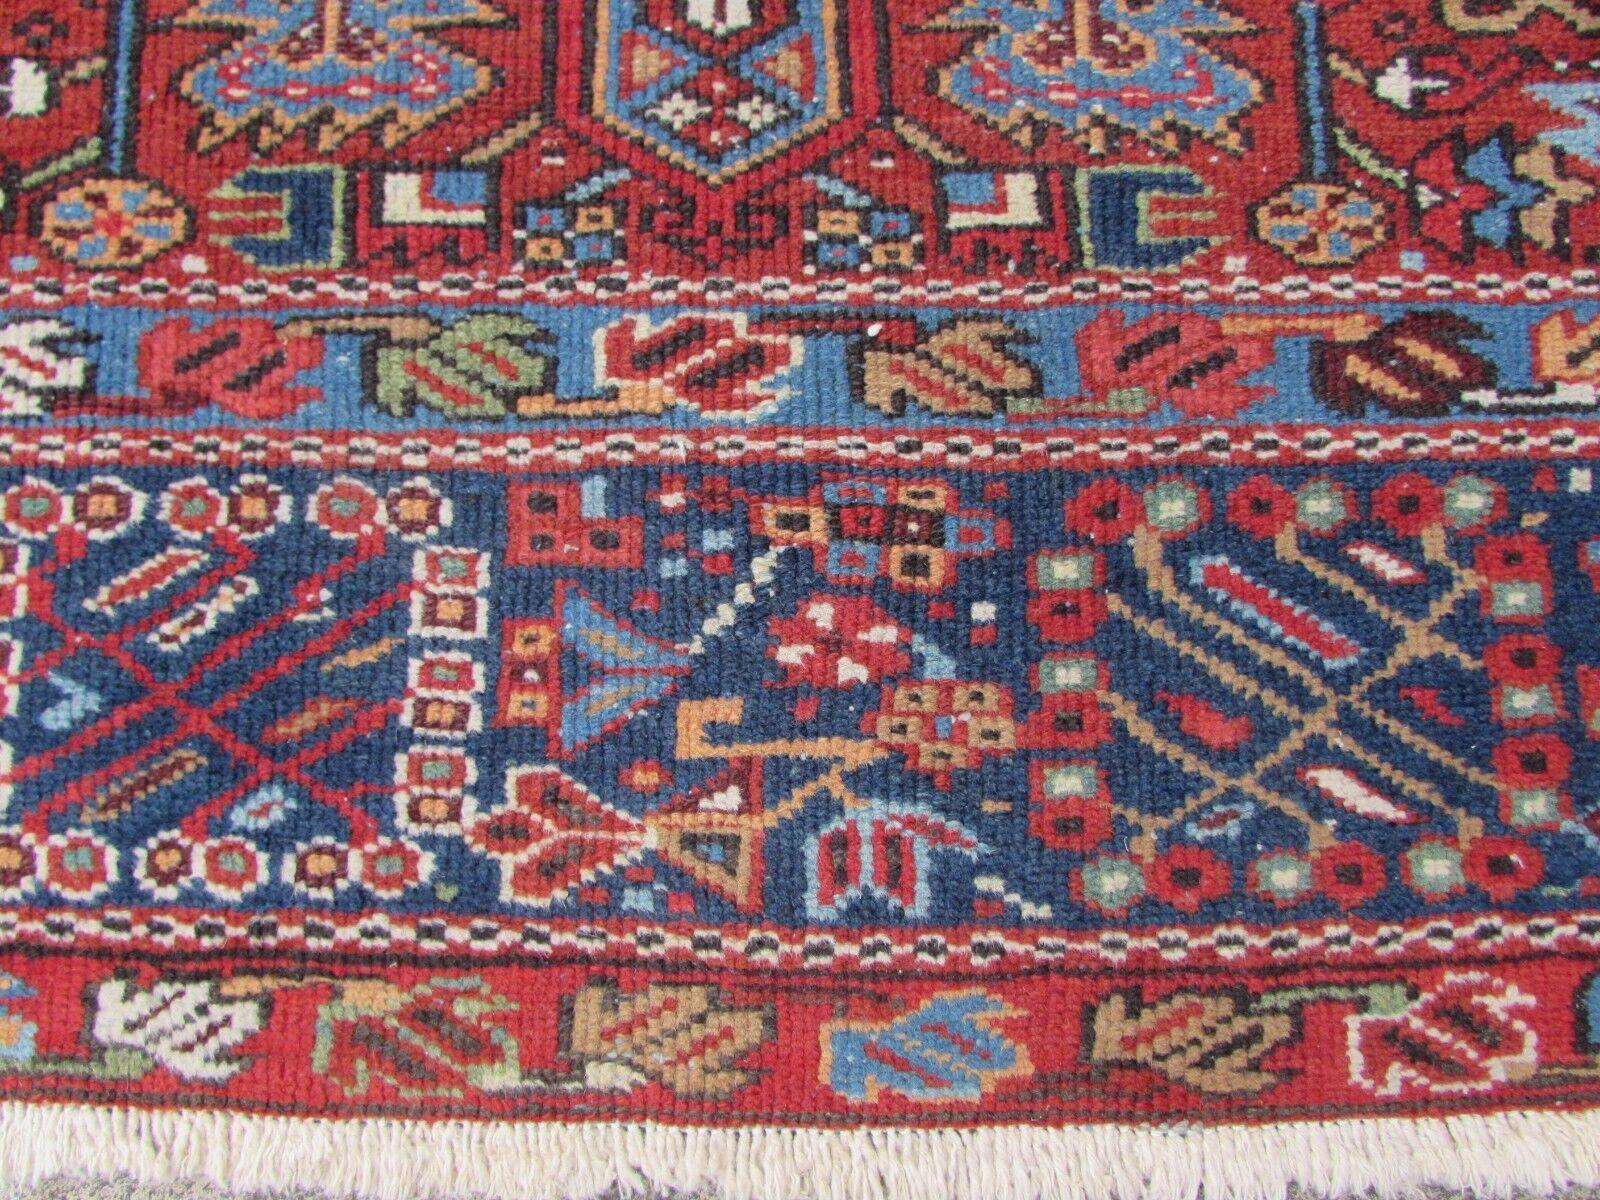  Handmade Antique Persian Style Karajeh Rug 4.6' x 6', 1920s - 1Q56 For Sale 4